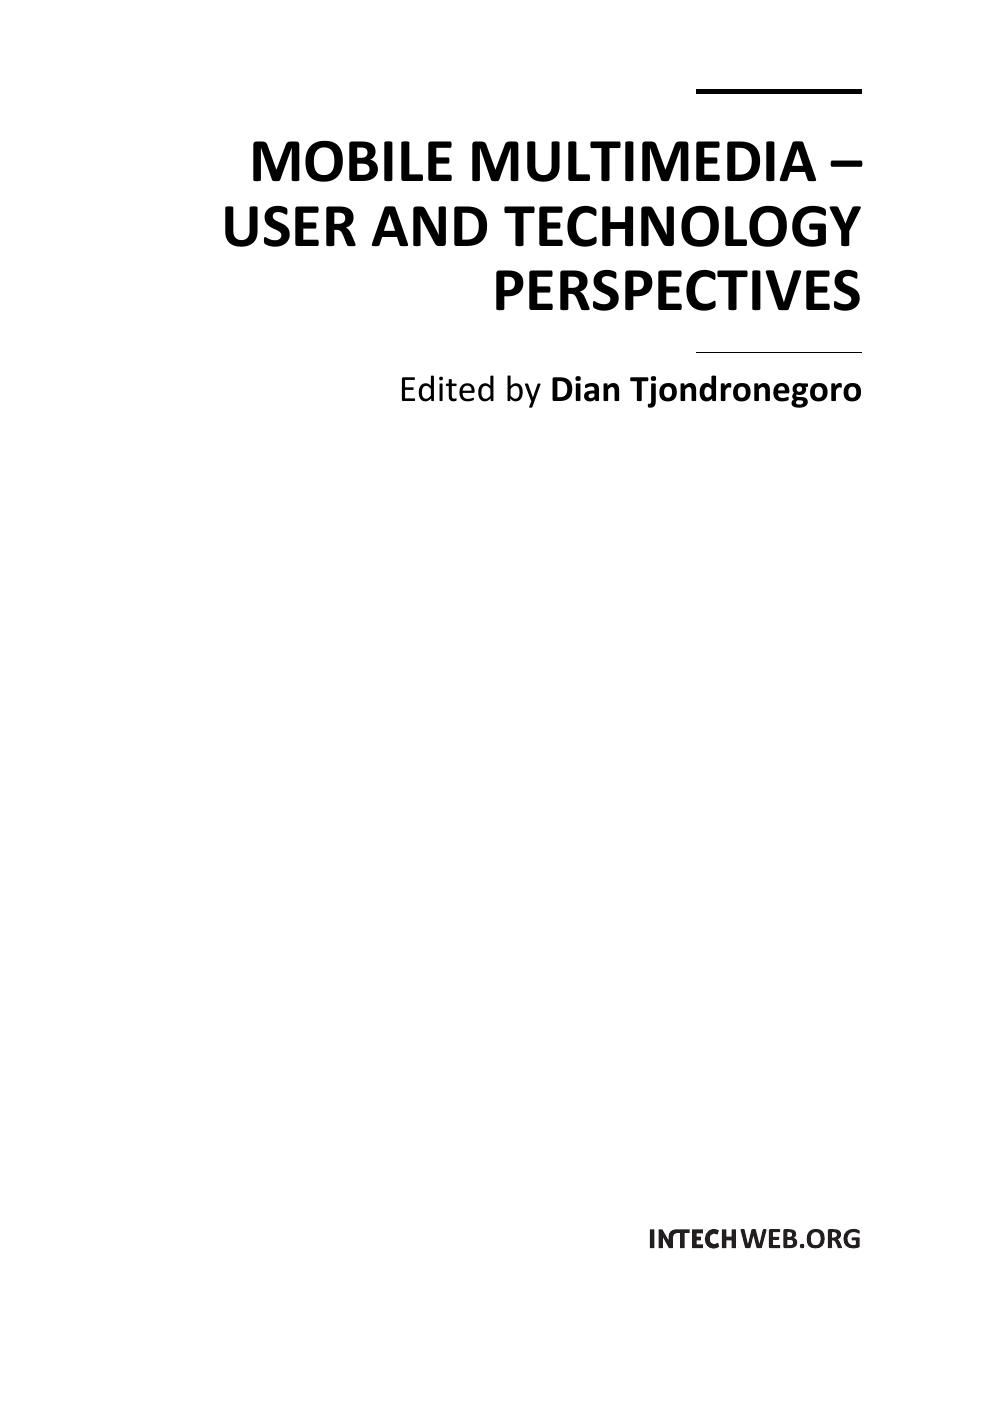 Microsoft Word - 00 preface_ Mobile Multimedia - User and Technology Perspectives